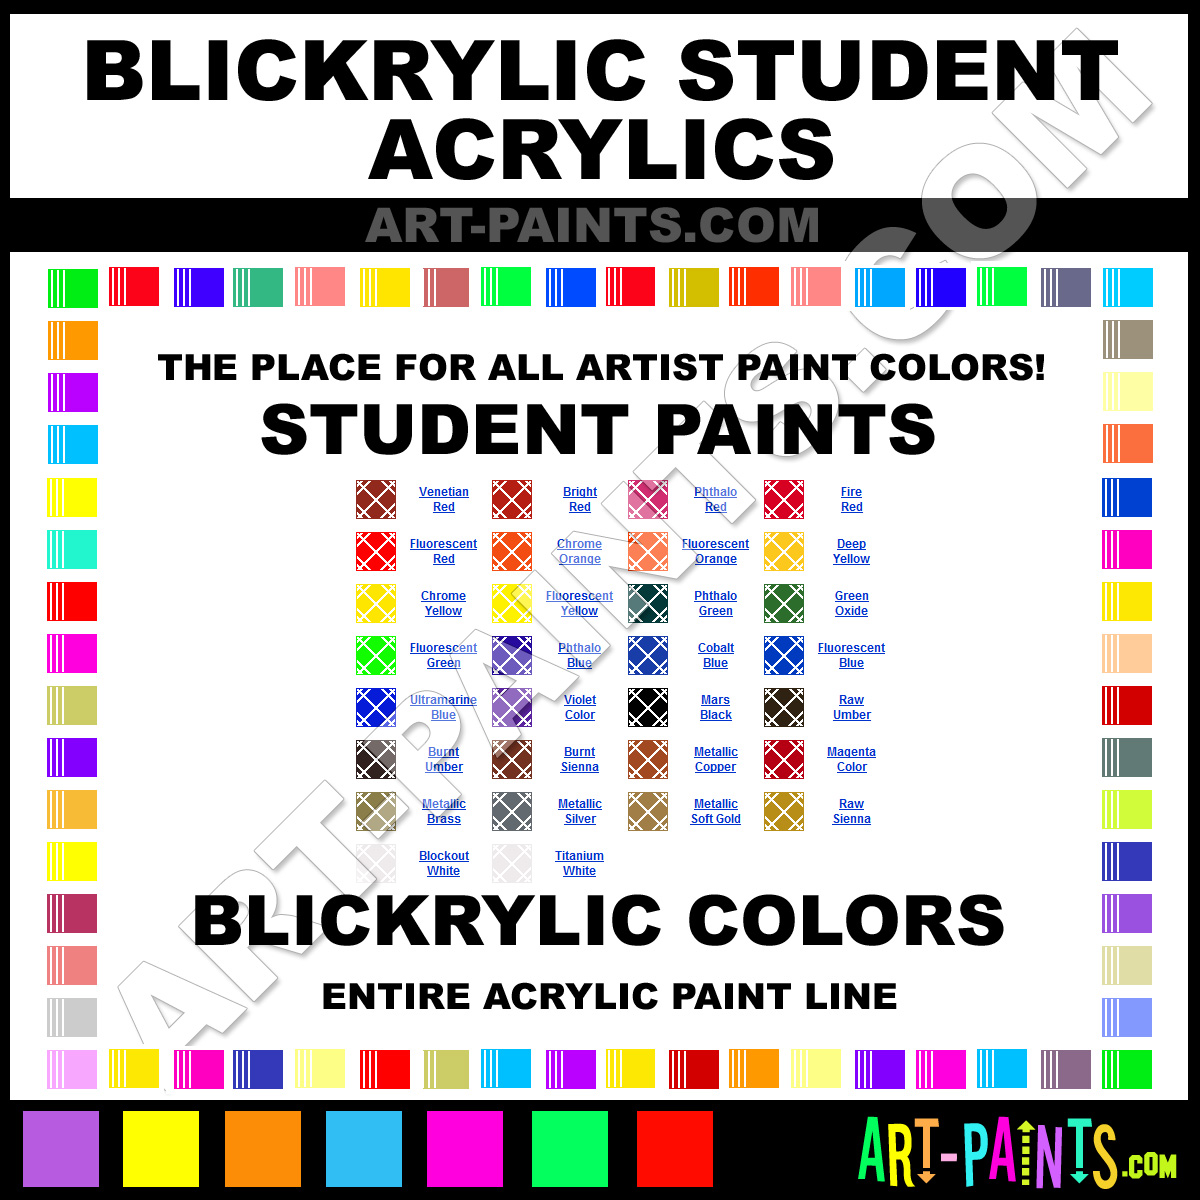 Blickrylic Student Acrylics - Bright Red, Pint